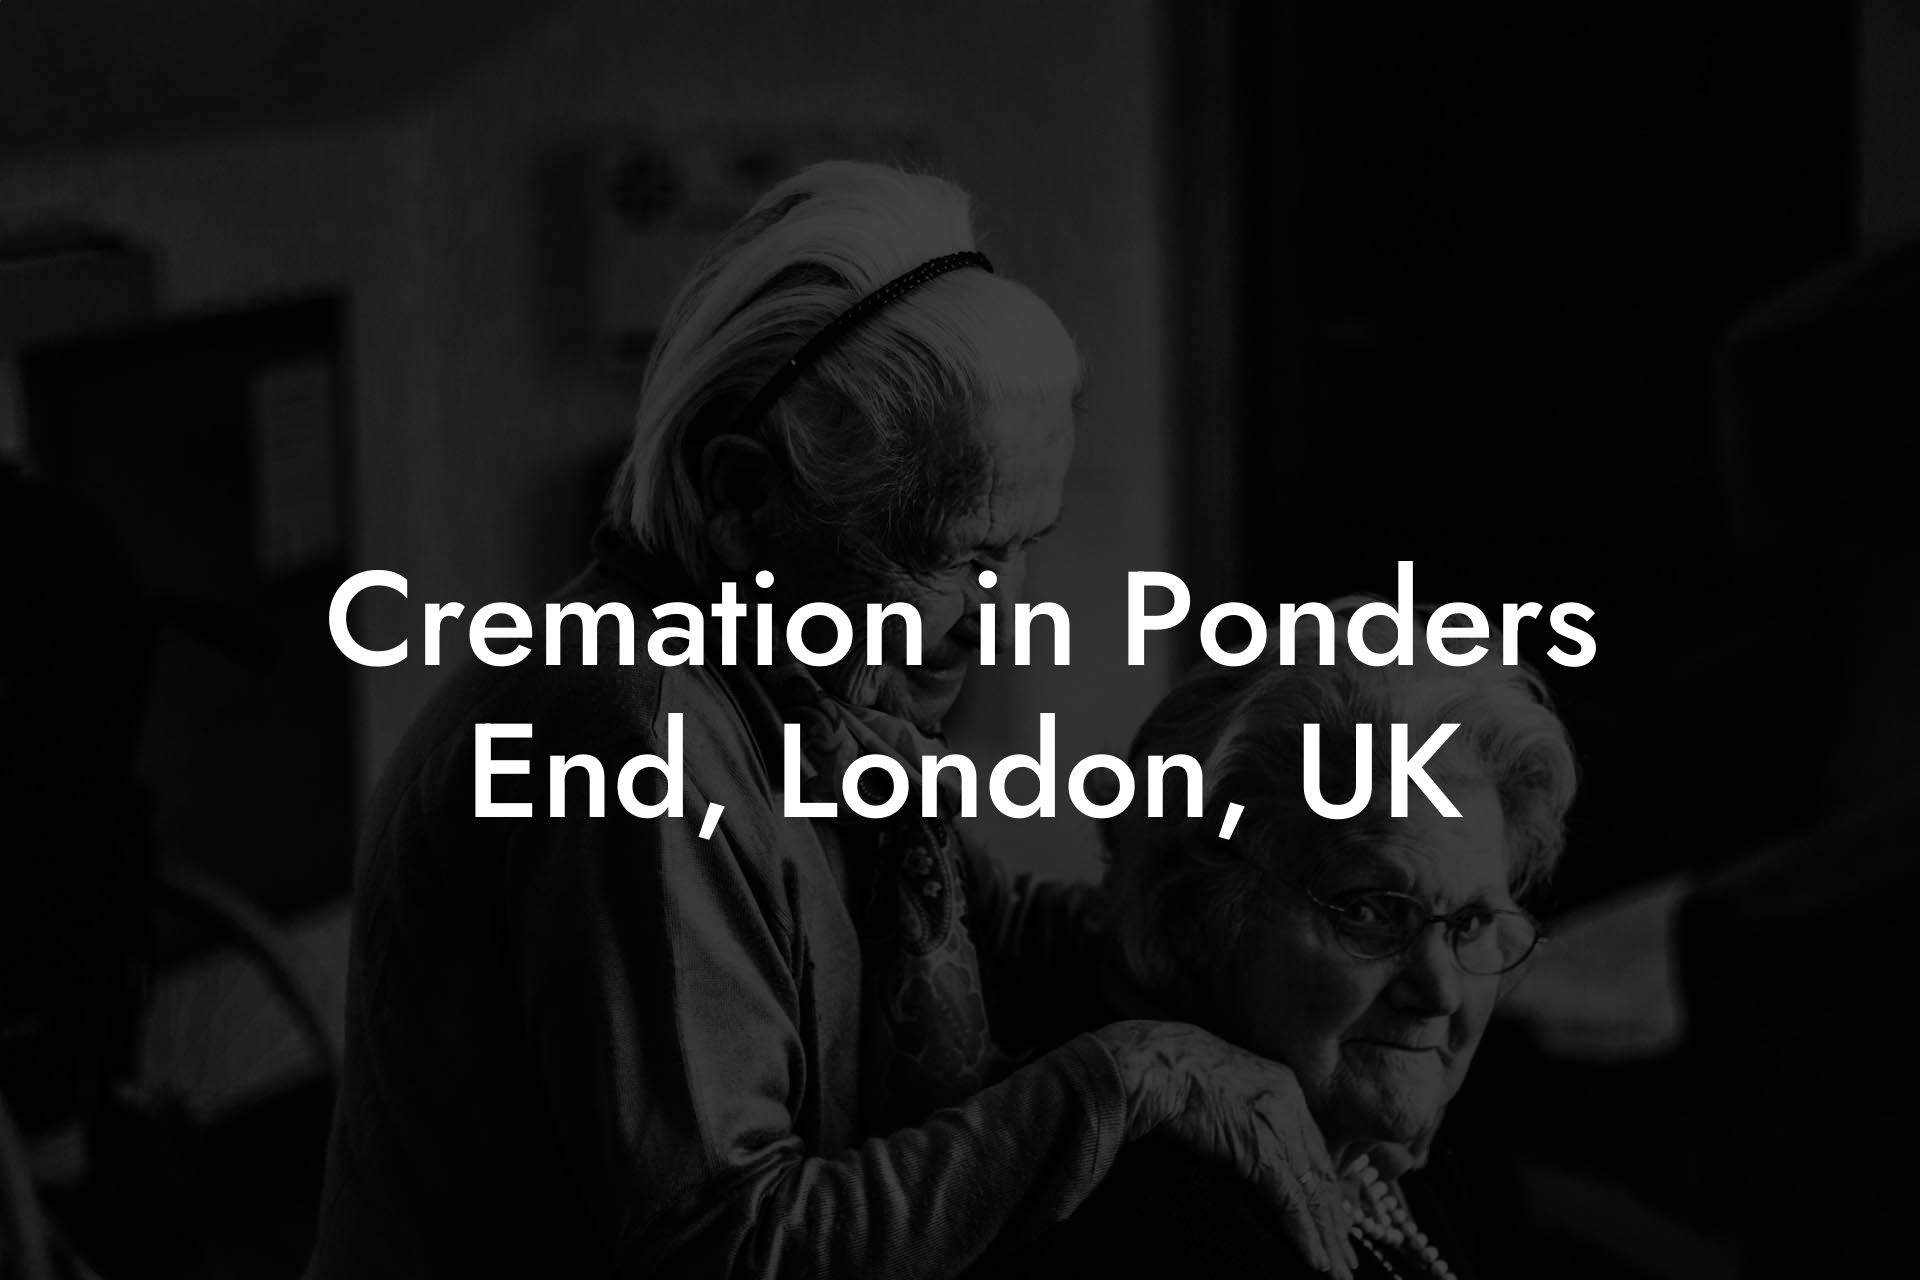 Cremation in Ponders End, London, UK